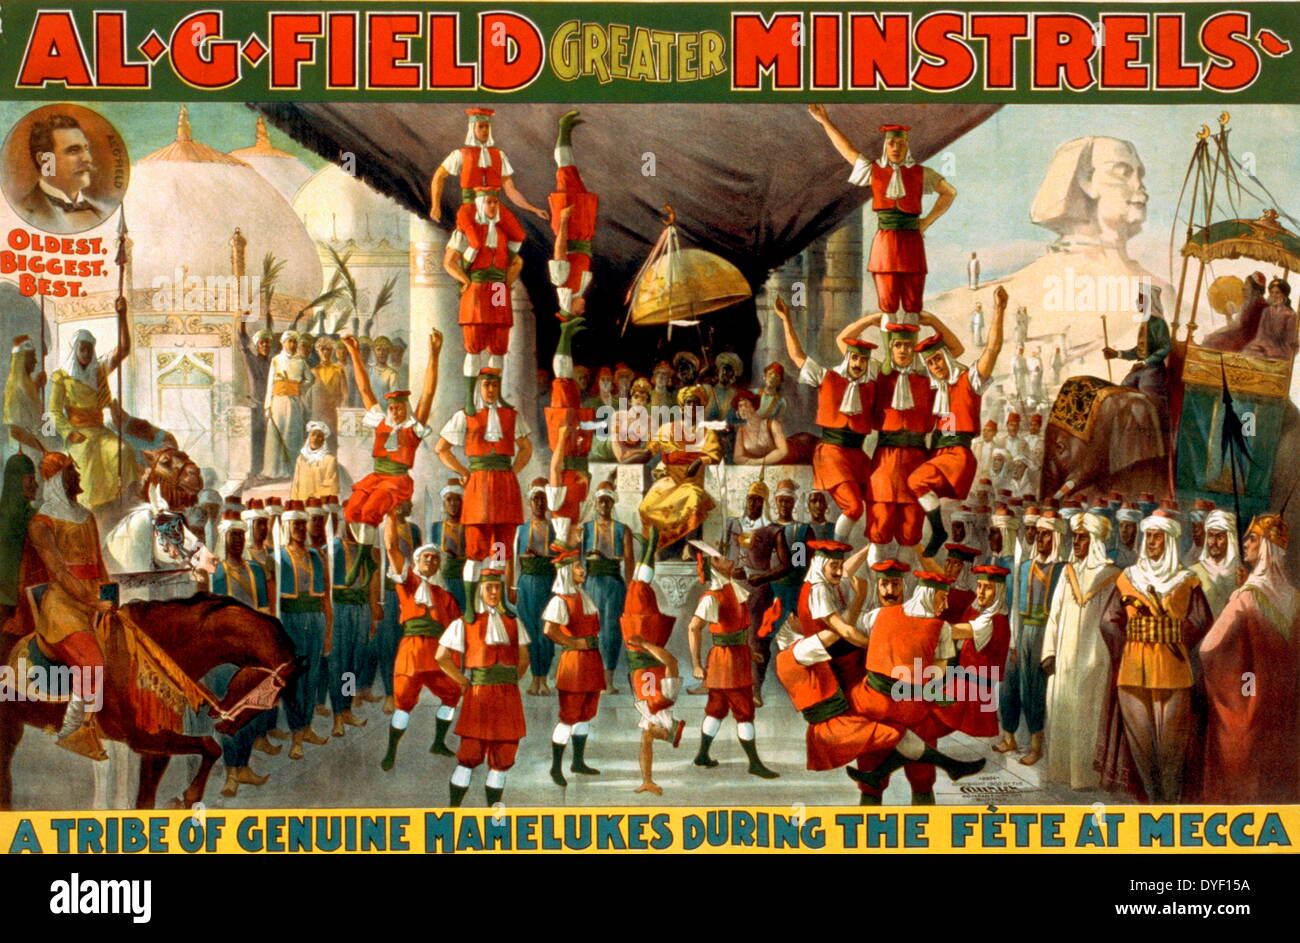 Vaudeville style painted poster advertising Al. G. Field's Greater Minstrels, described as 'A Tribe of Genuine Mamelukes during the fete at mecca'. The image shows them performing acrobatic balancing feats. Circa late 19th-Early 20th century. Stock Photo